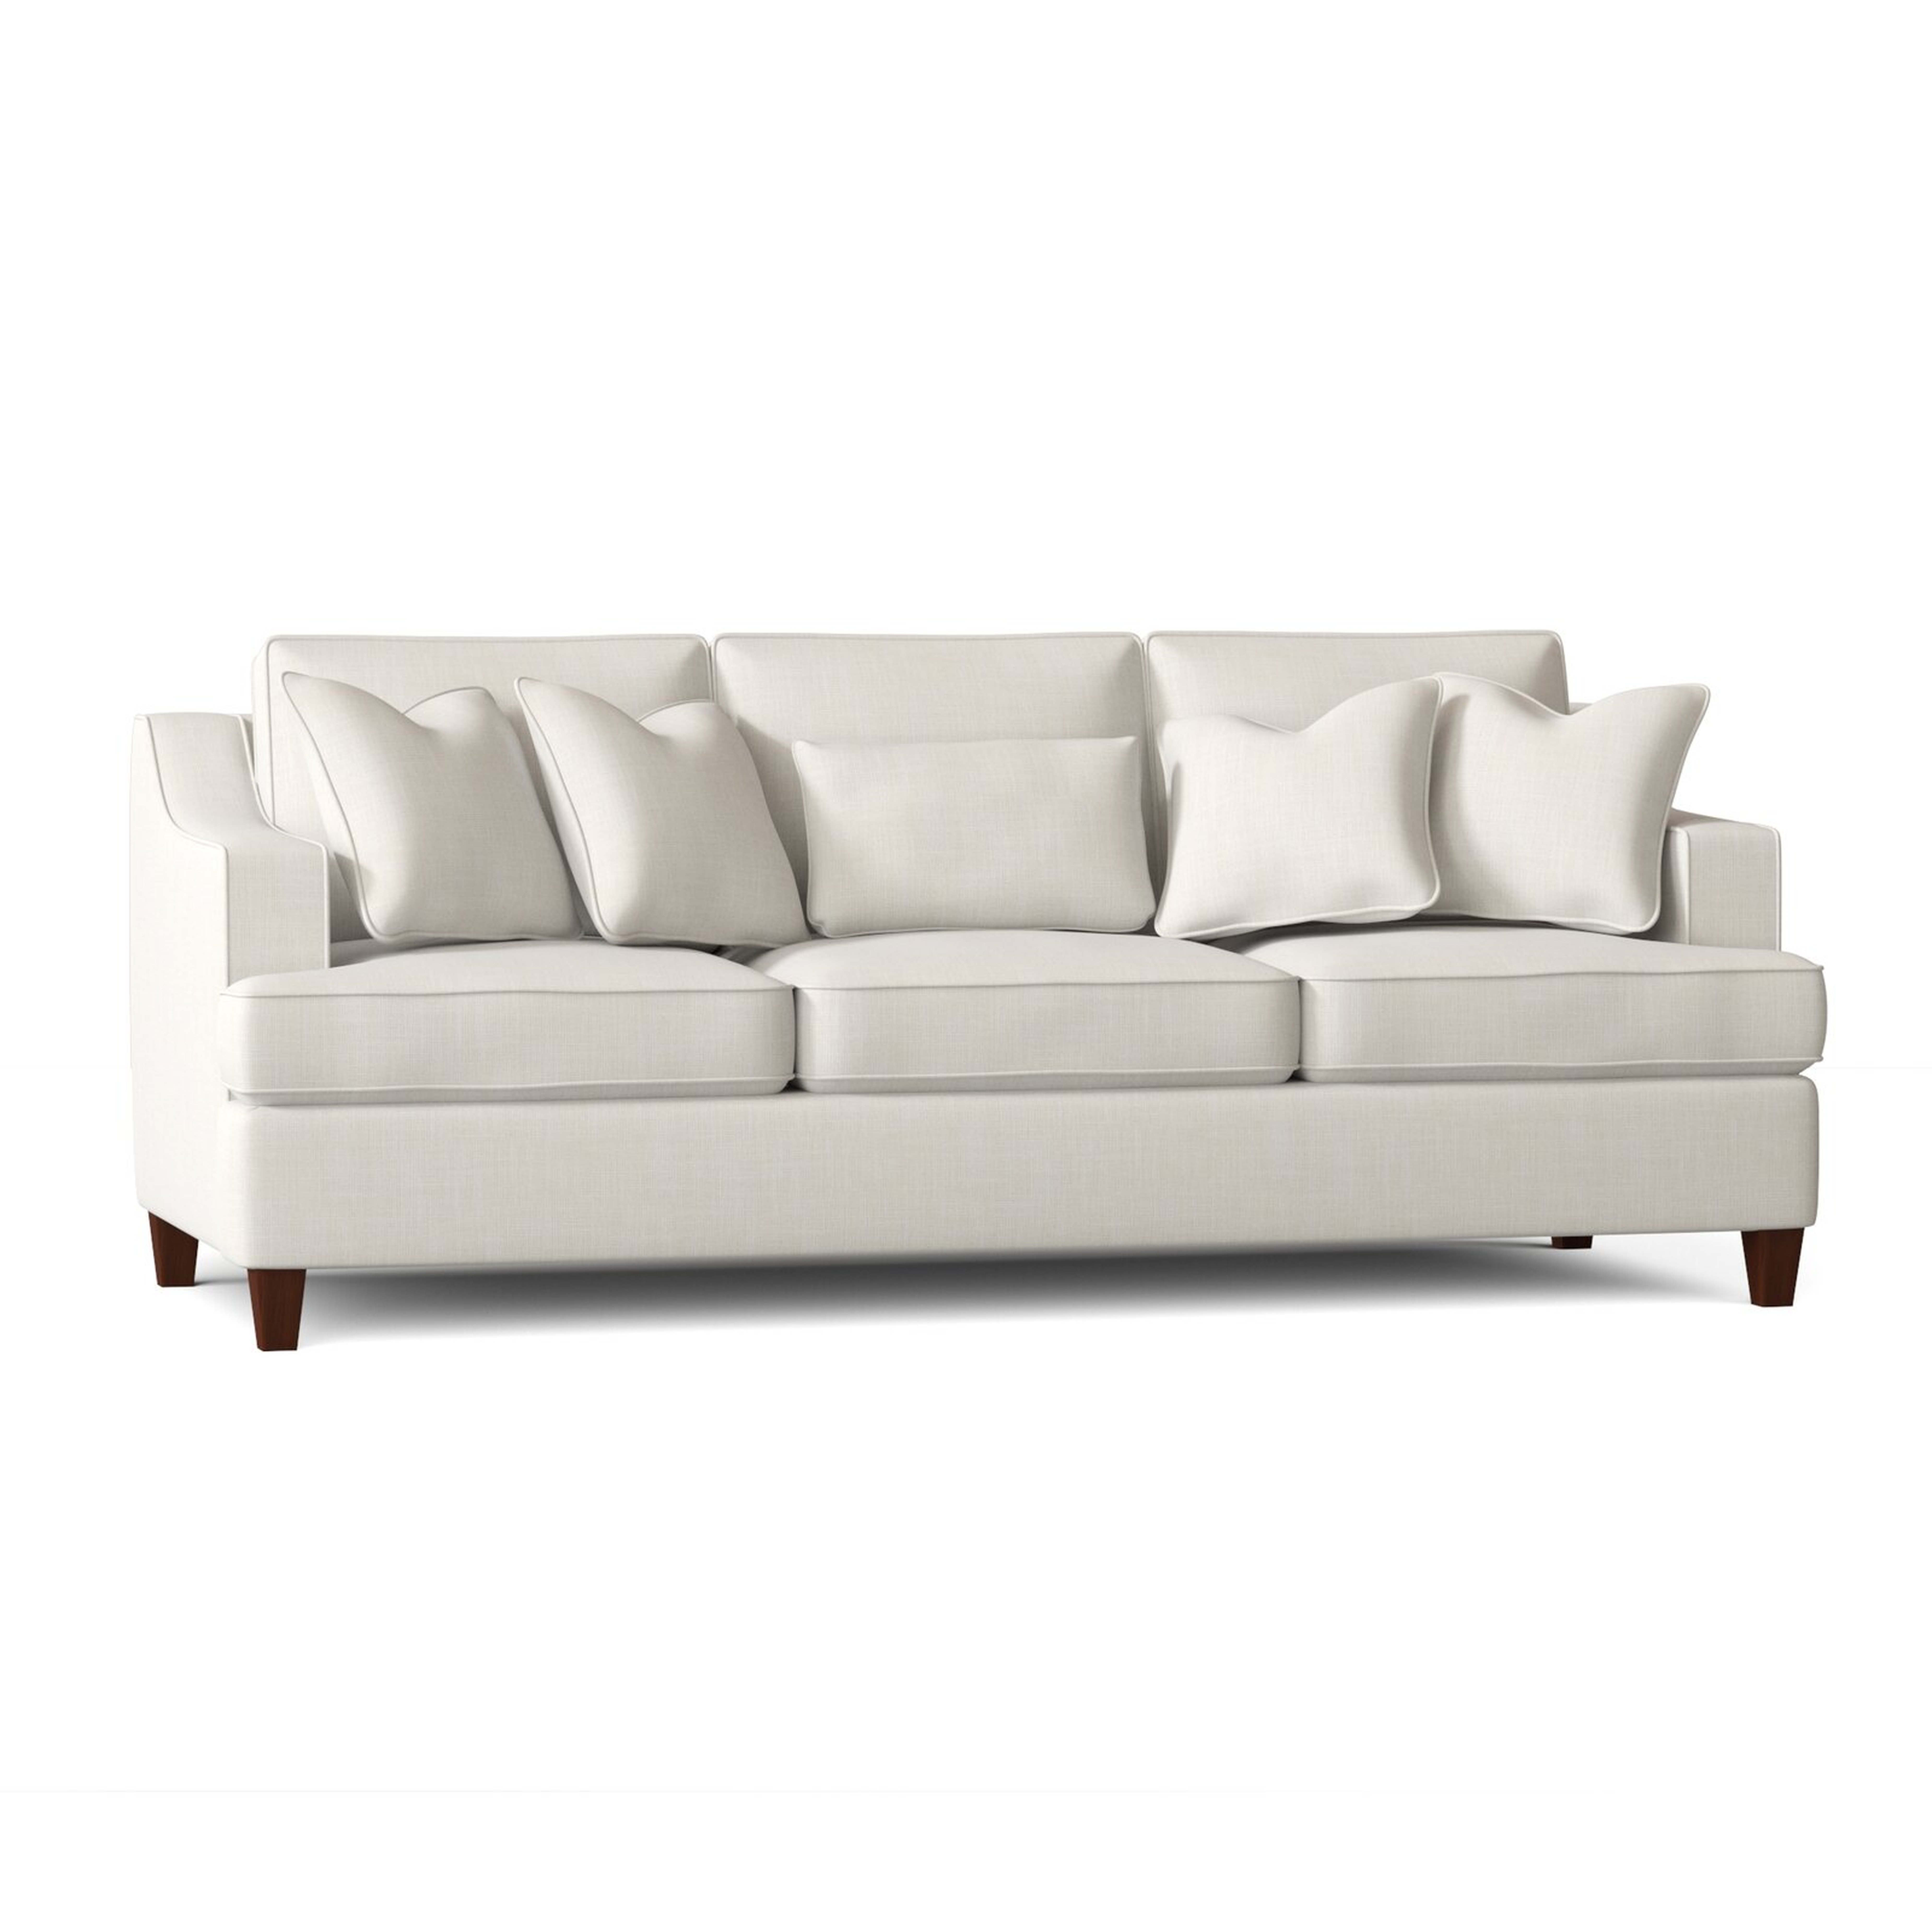 Sonny 91" Recessed Arm Sofa with Reversible Cushions - Birch Lane